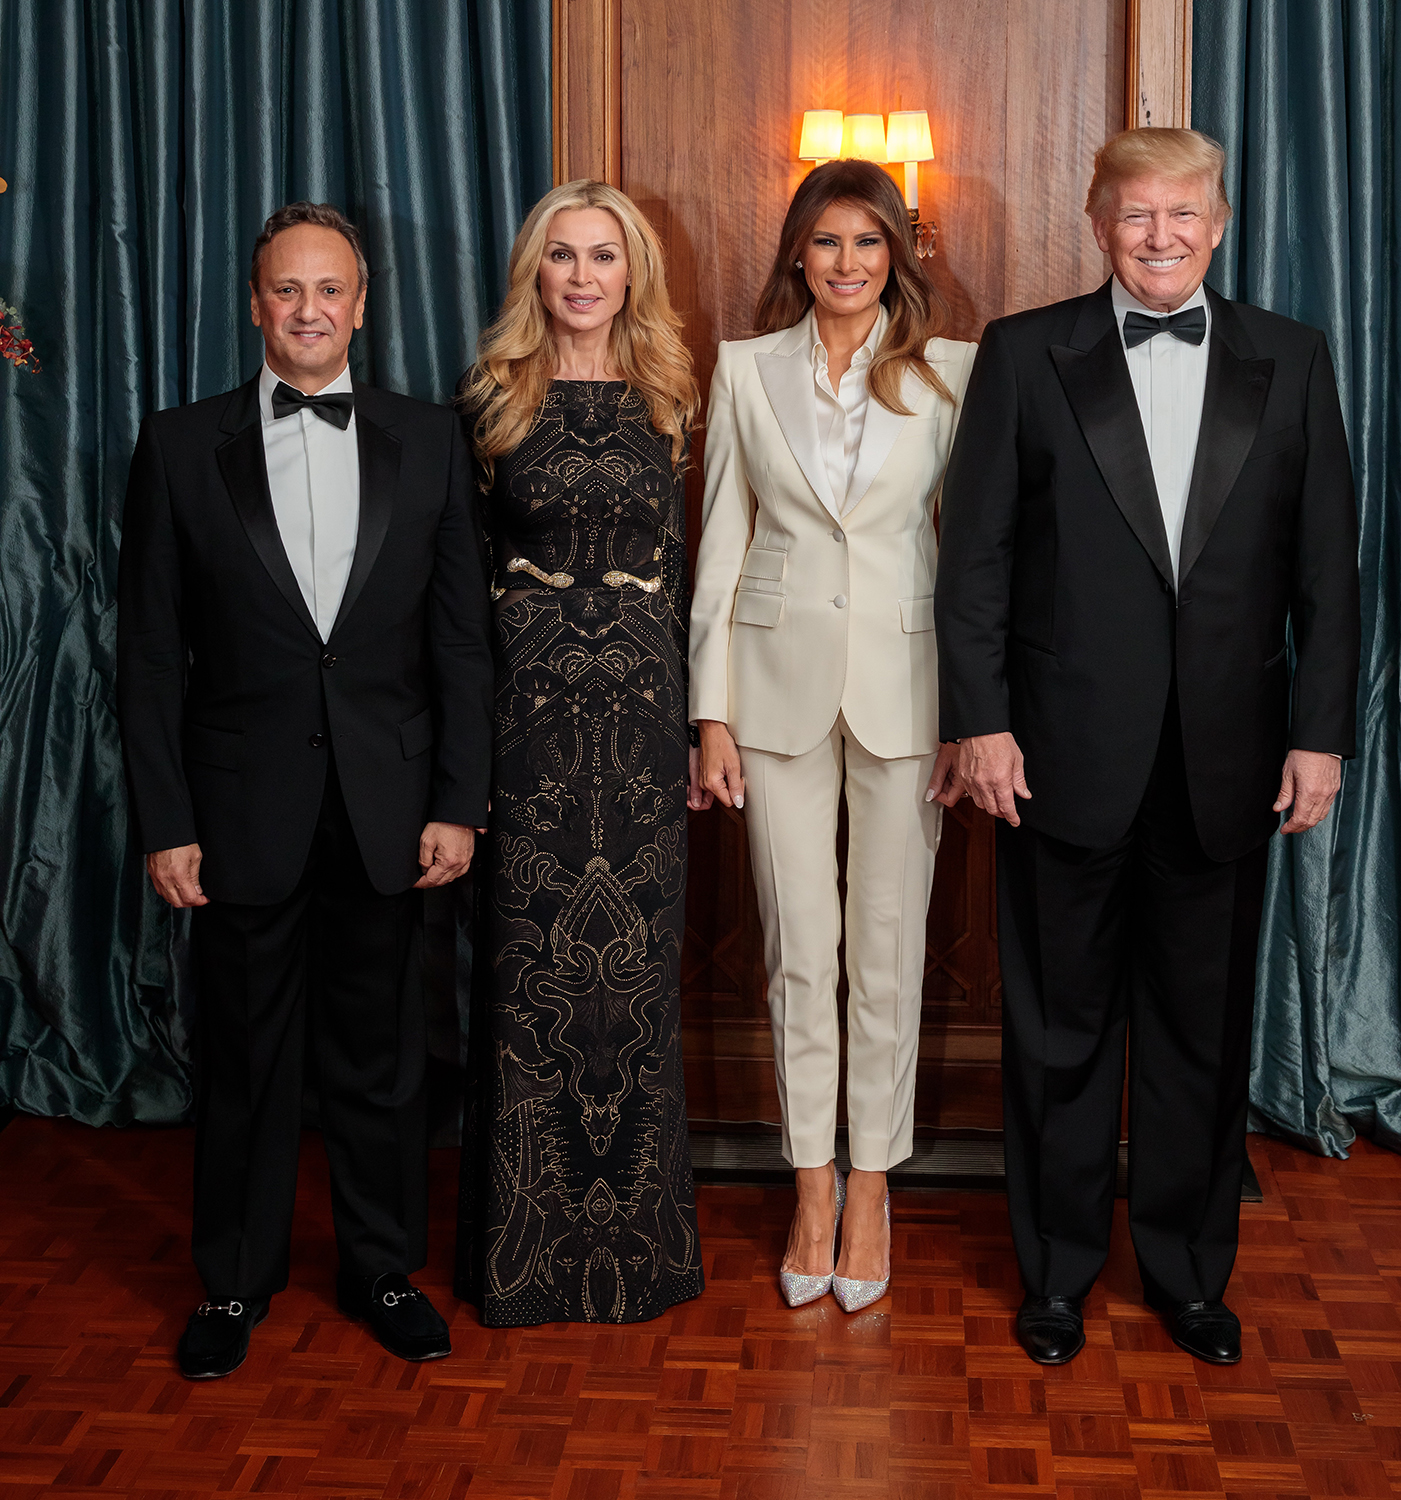 US President Donald Trump and top cabinet officials gathered at the Kuwait Embassy in Washington for an intimate evening of celebration in honor of First Lady Melania Trump's humanitarian service.